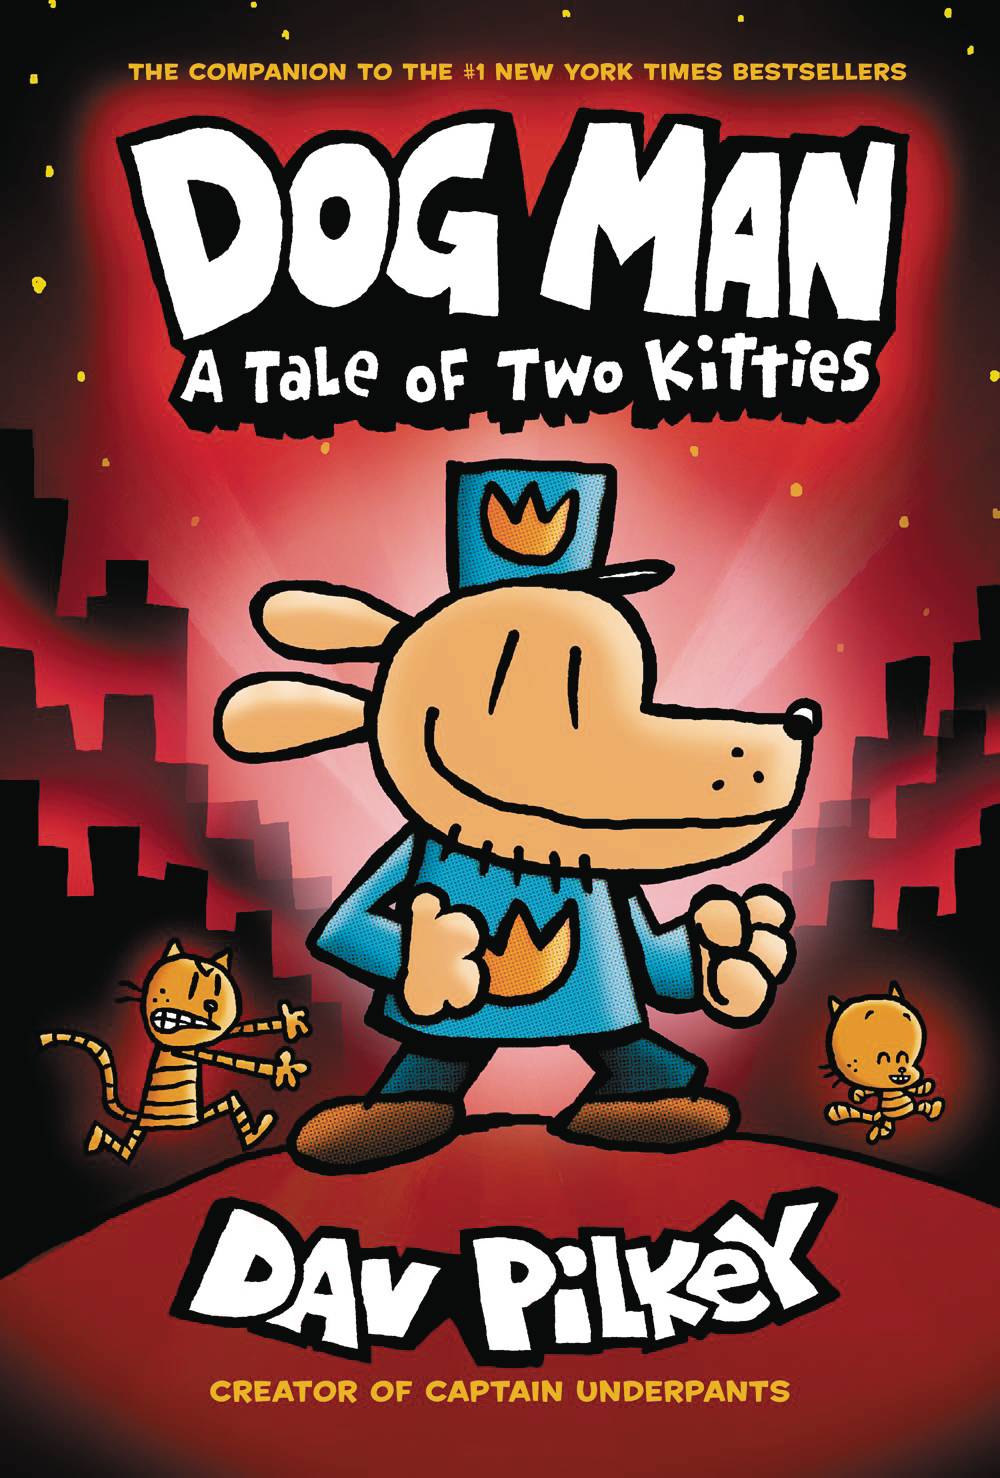 Dog Man Hardcover Graphic Novel Volume 3 Tale of Two Kitties